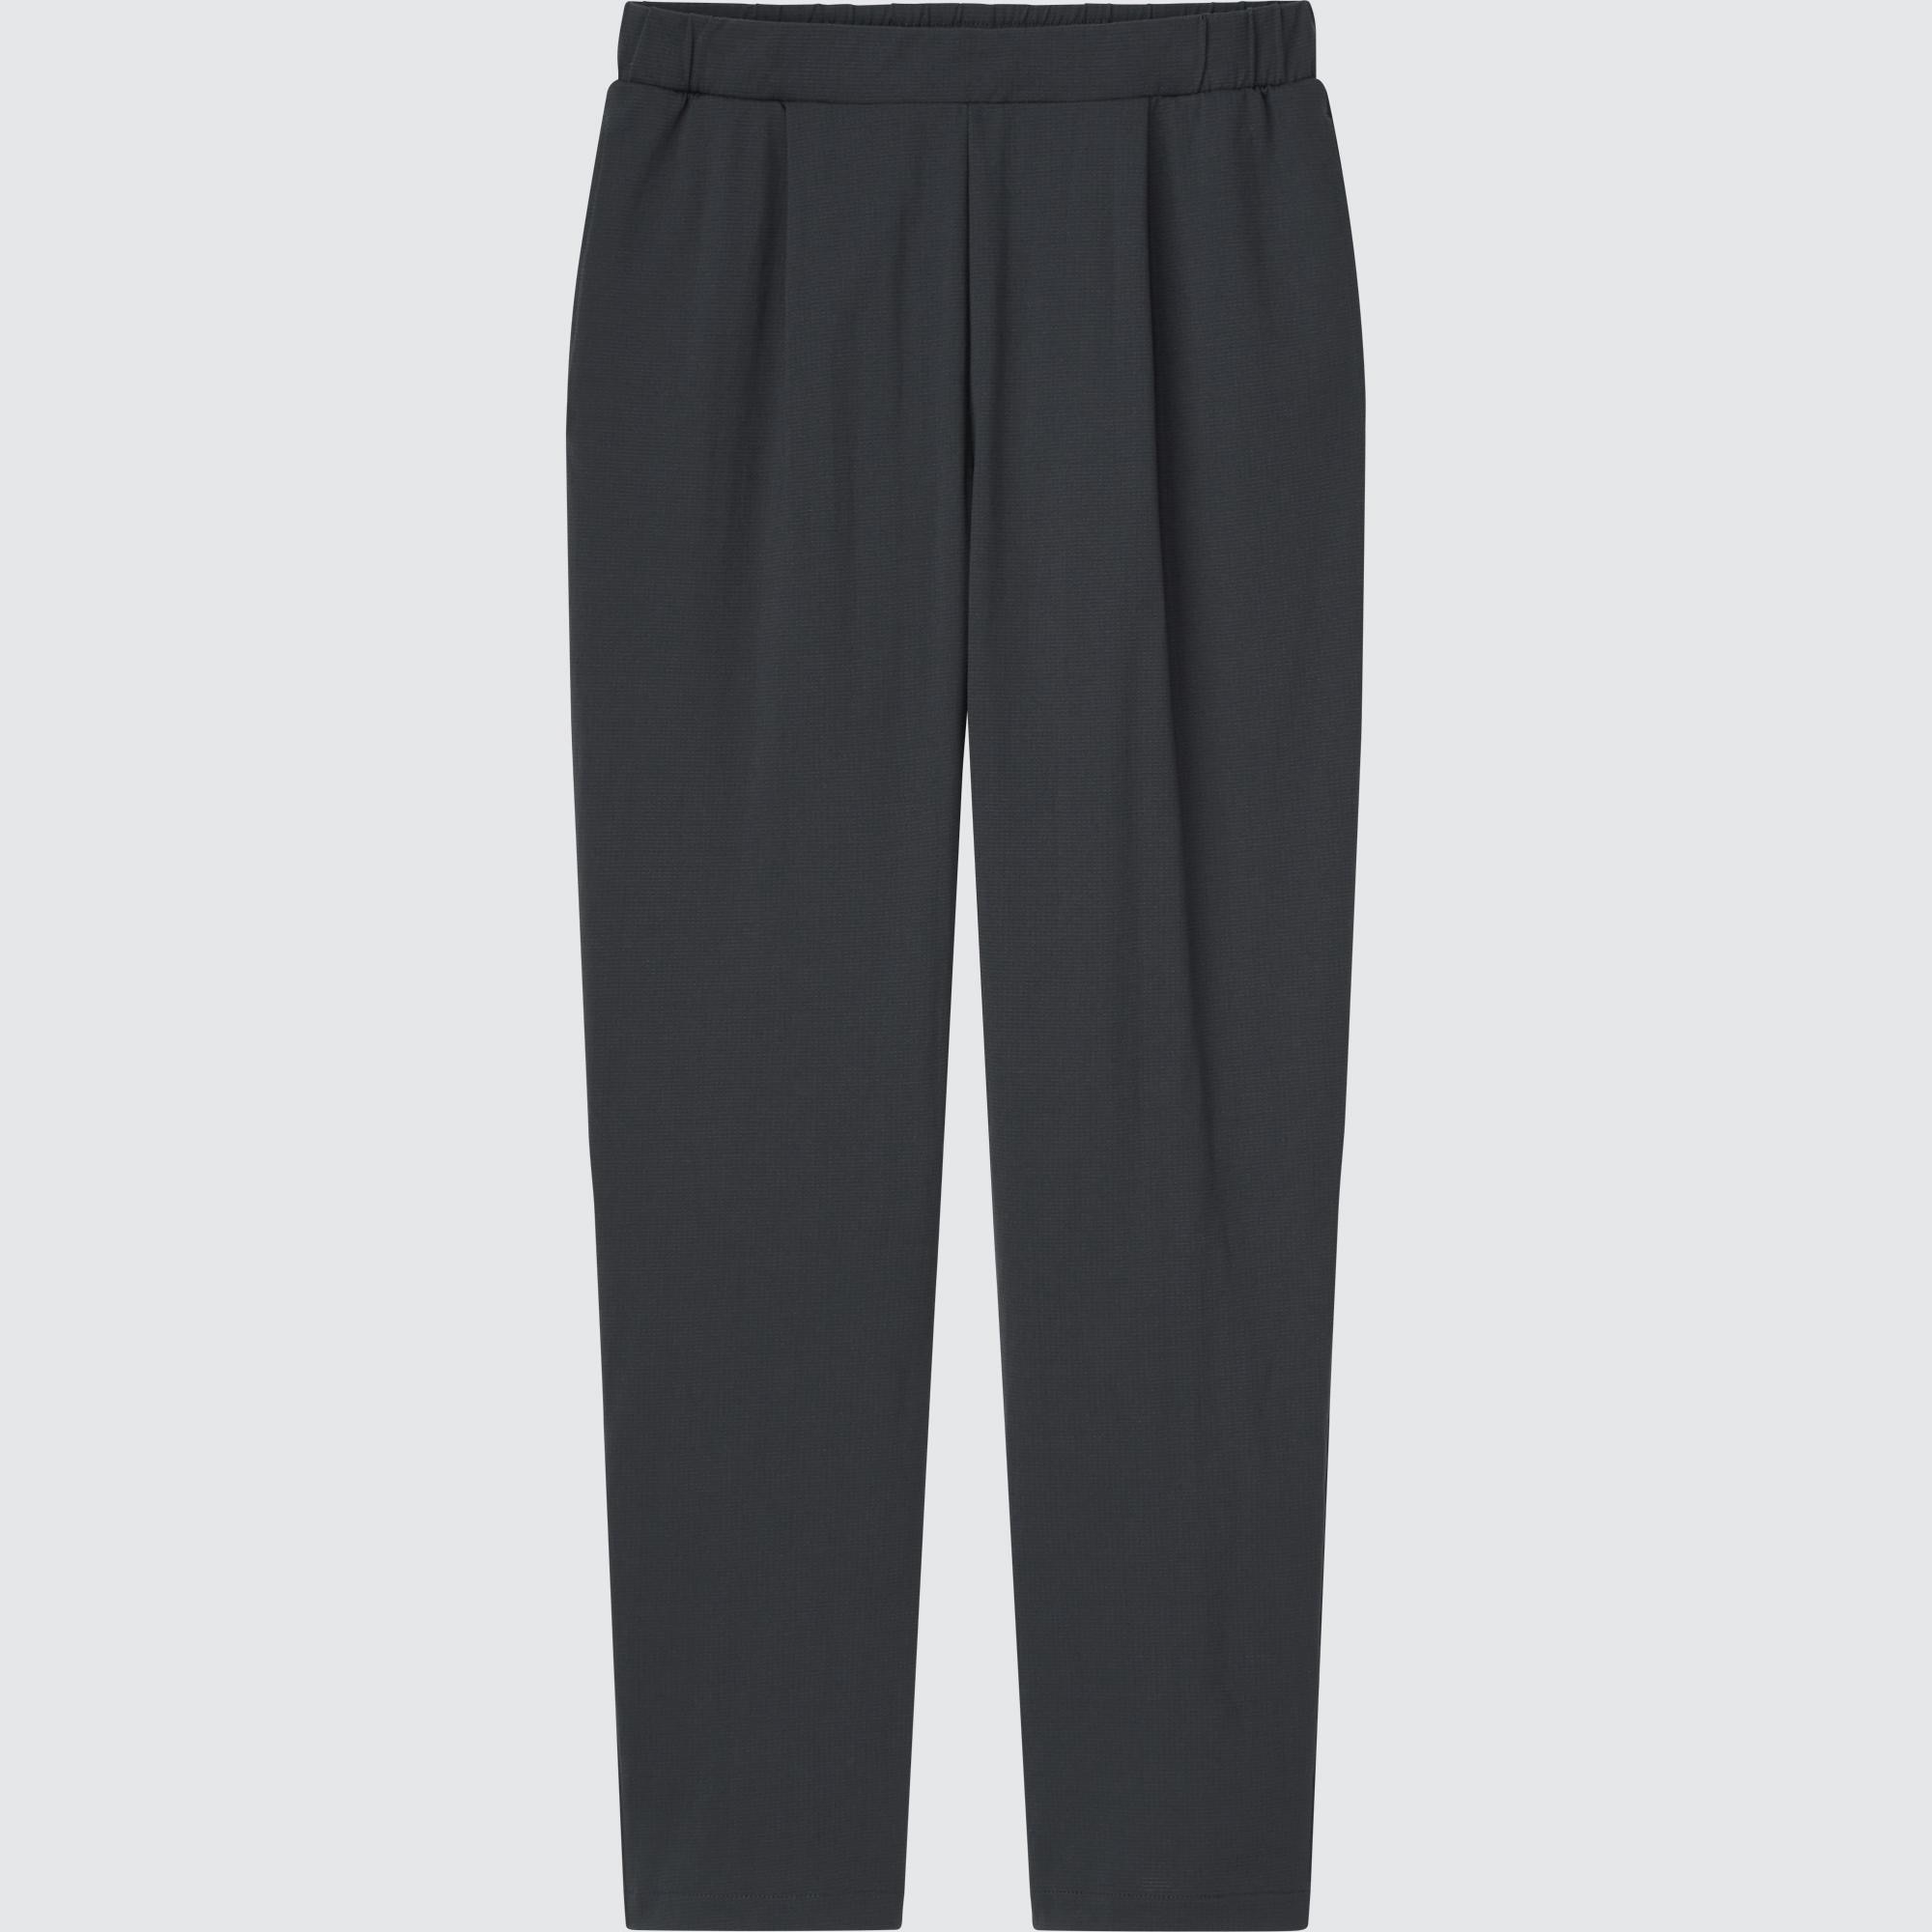 Check styling ideas for「Ultra Stretch Active Tapered Pants」